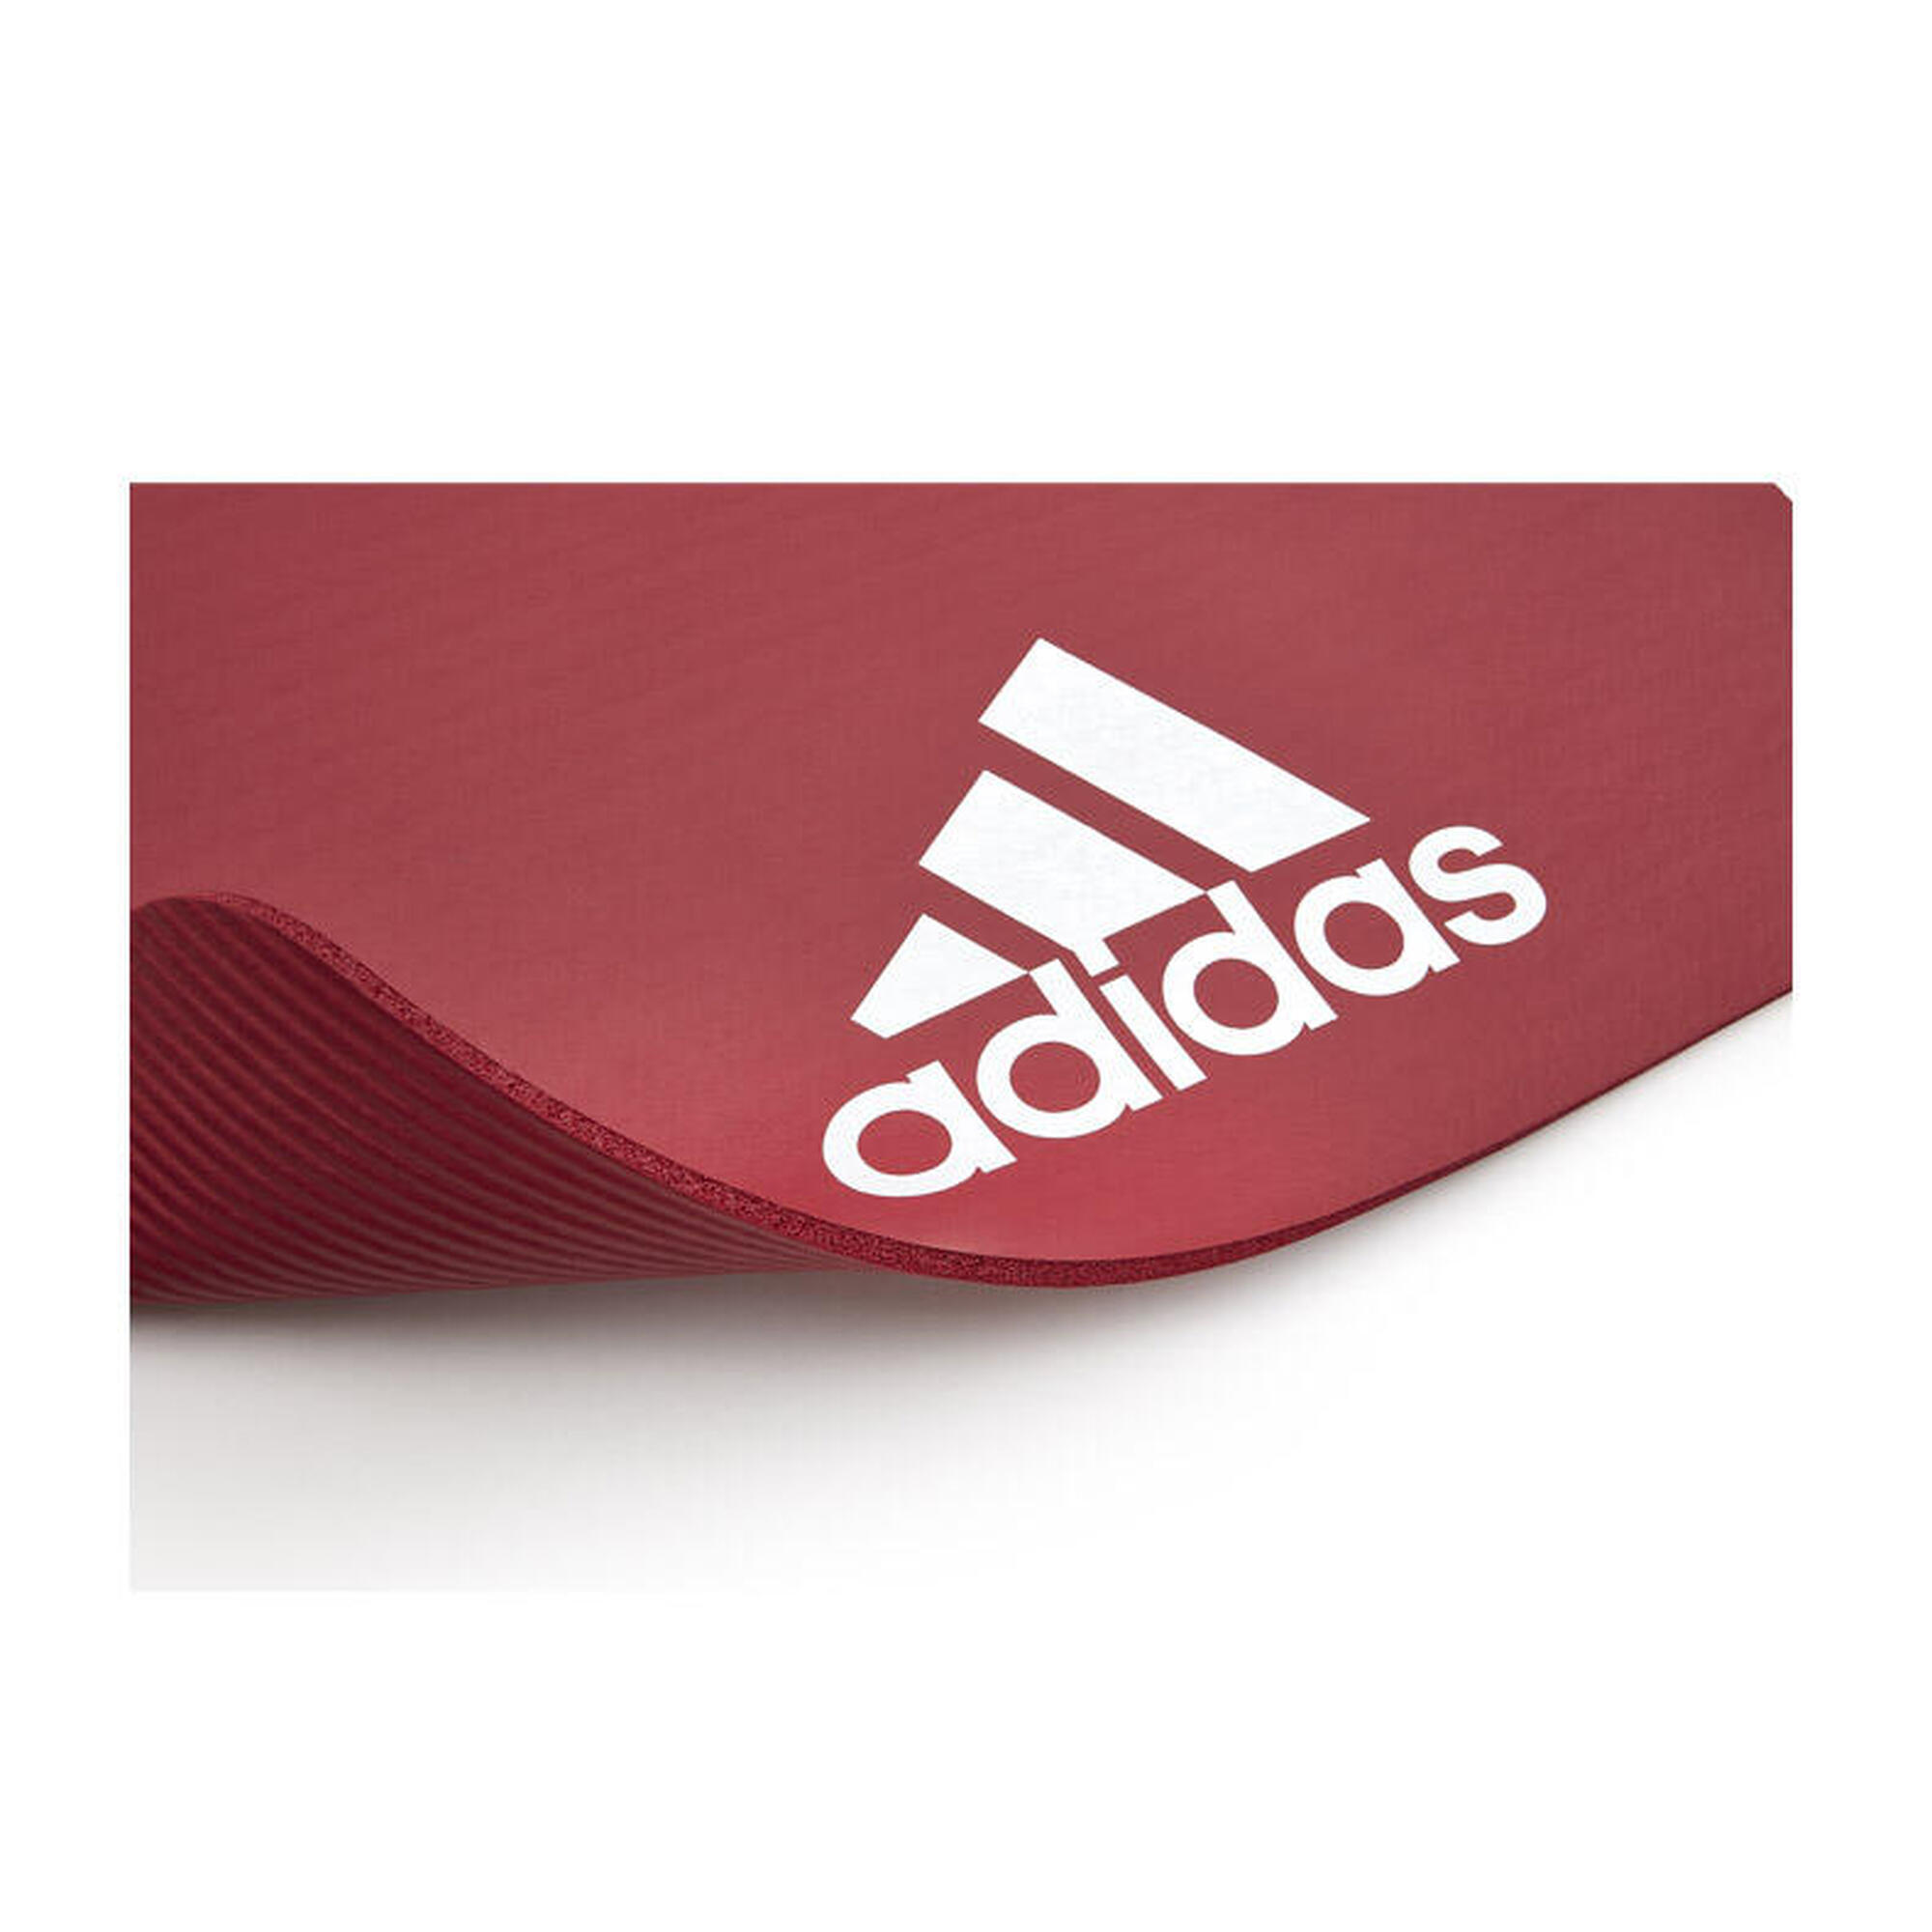 Tappetino di fitness Adidas - 7mm - Rosso